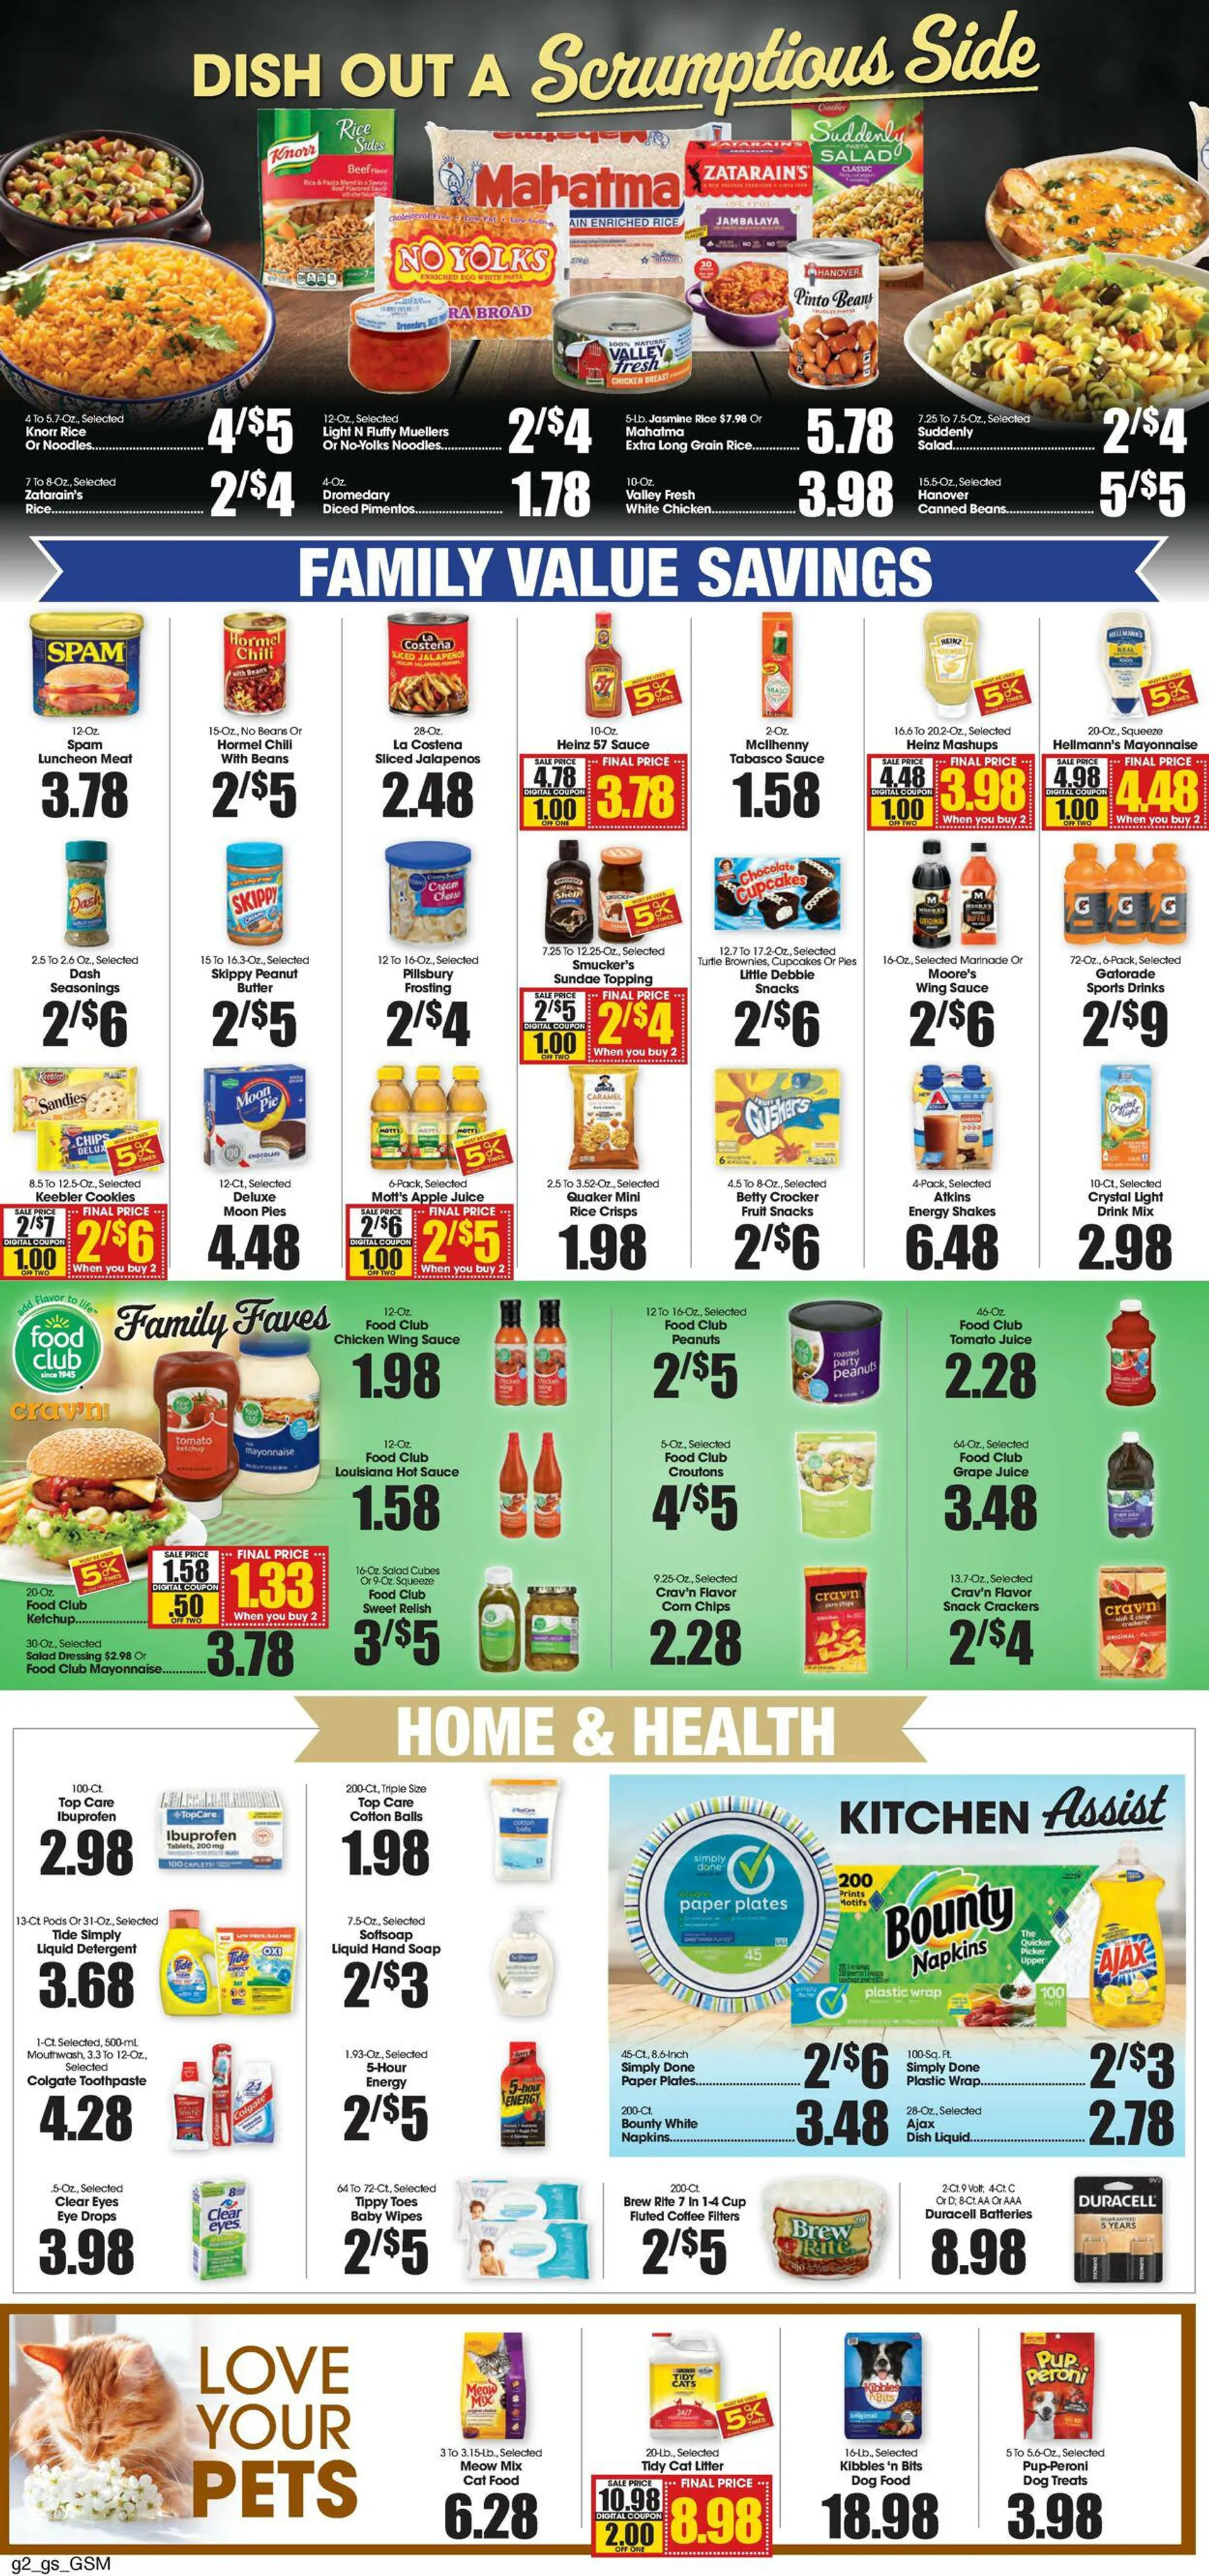 Grants Supermarket Current weekly ad - 2